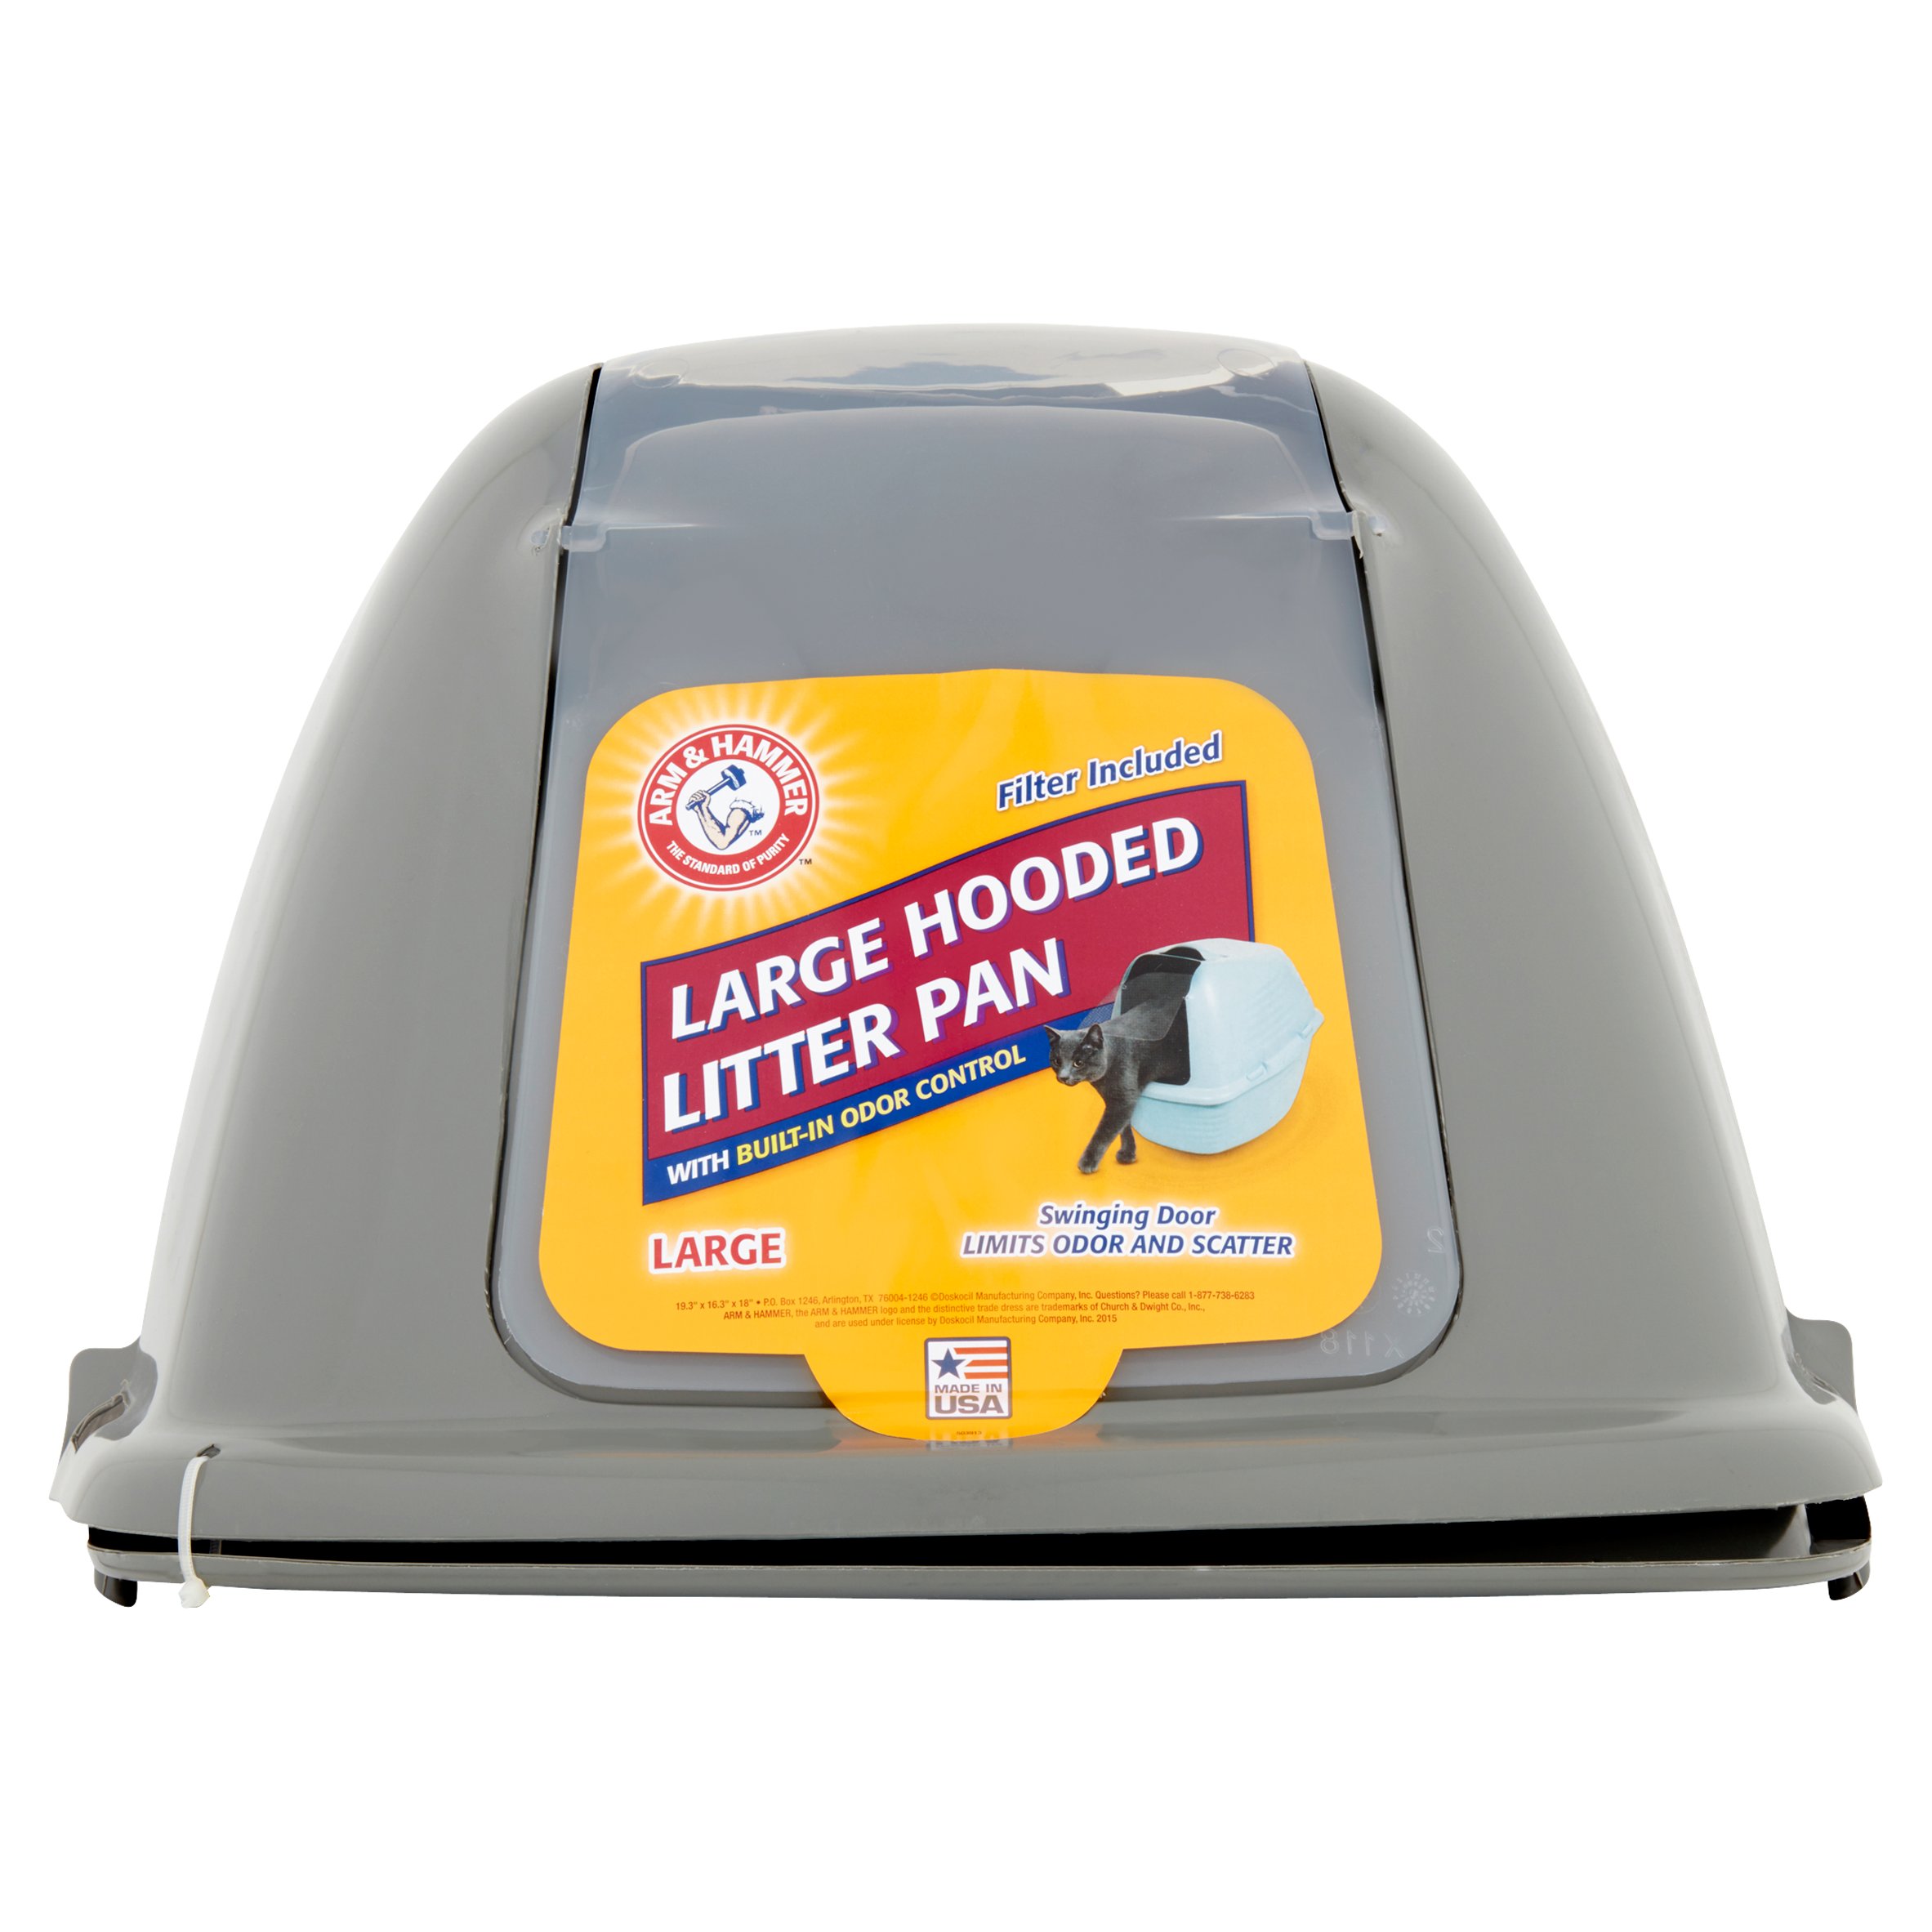 Arm & Hammer Hooded Litter Box Plastic Enclosed Wave Cat Litter Pan with Swing Door, Large - image 1 of 5